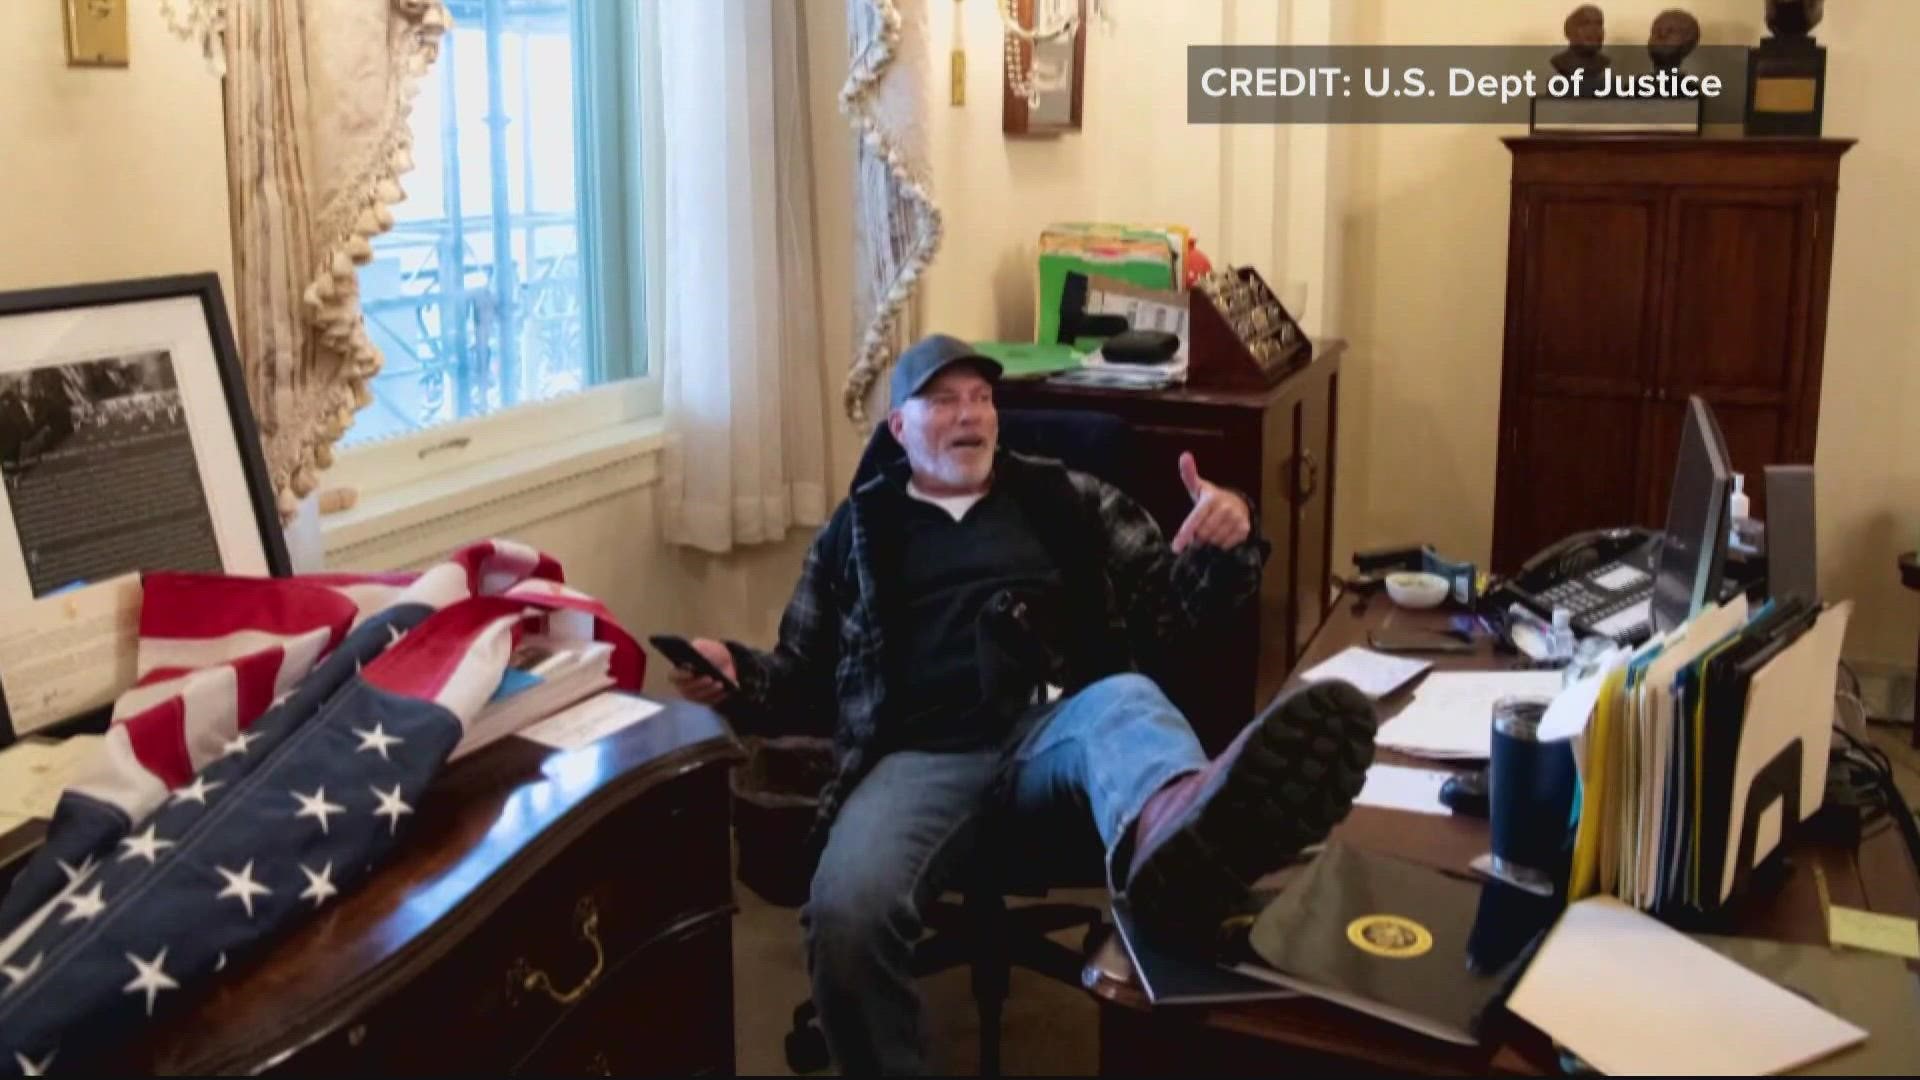 The trial for an Arkansas man photographed with his feet up on a desk in former Speaker of the House Nancy Pelosi’s office on Jan. 6 will continue as scheduled today